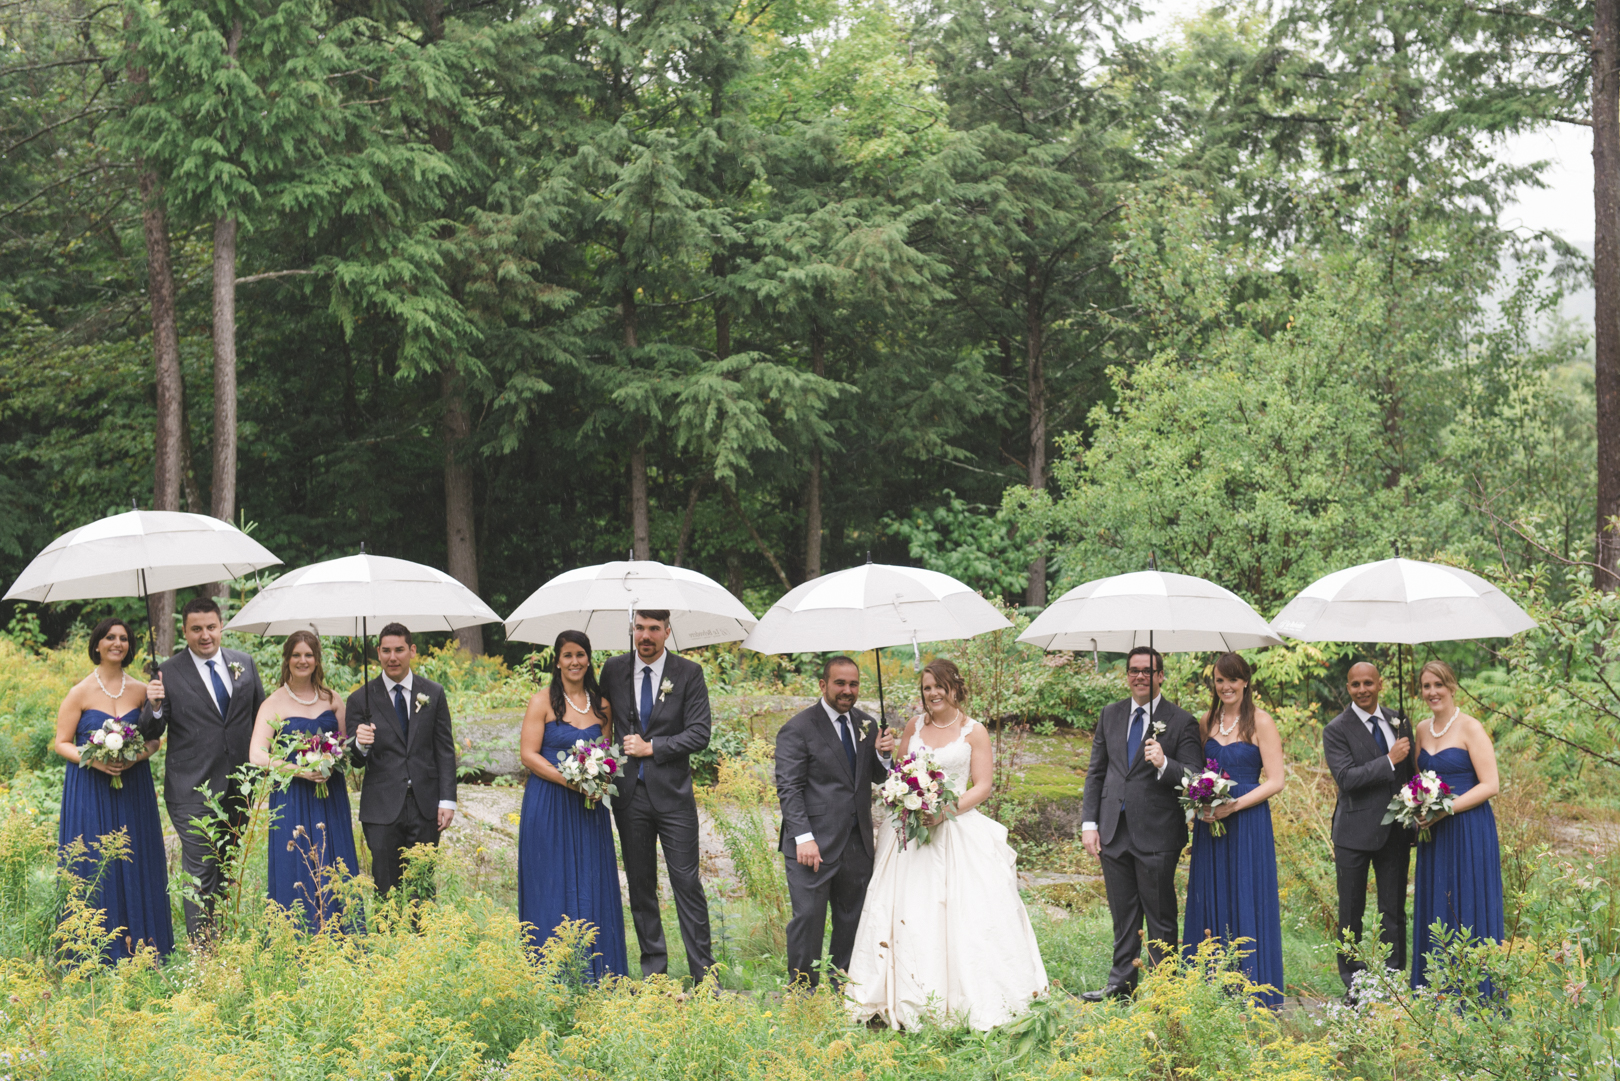 wedding party standing in the rain with umbrellas at le belvedere